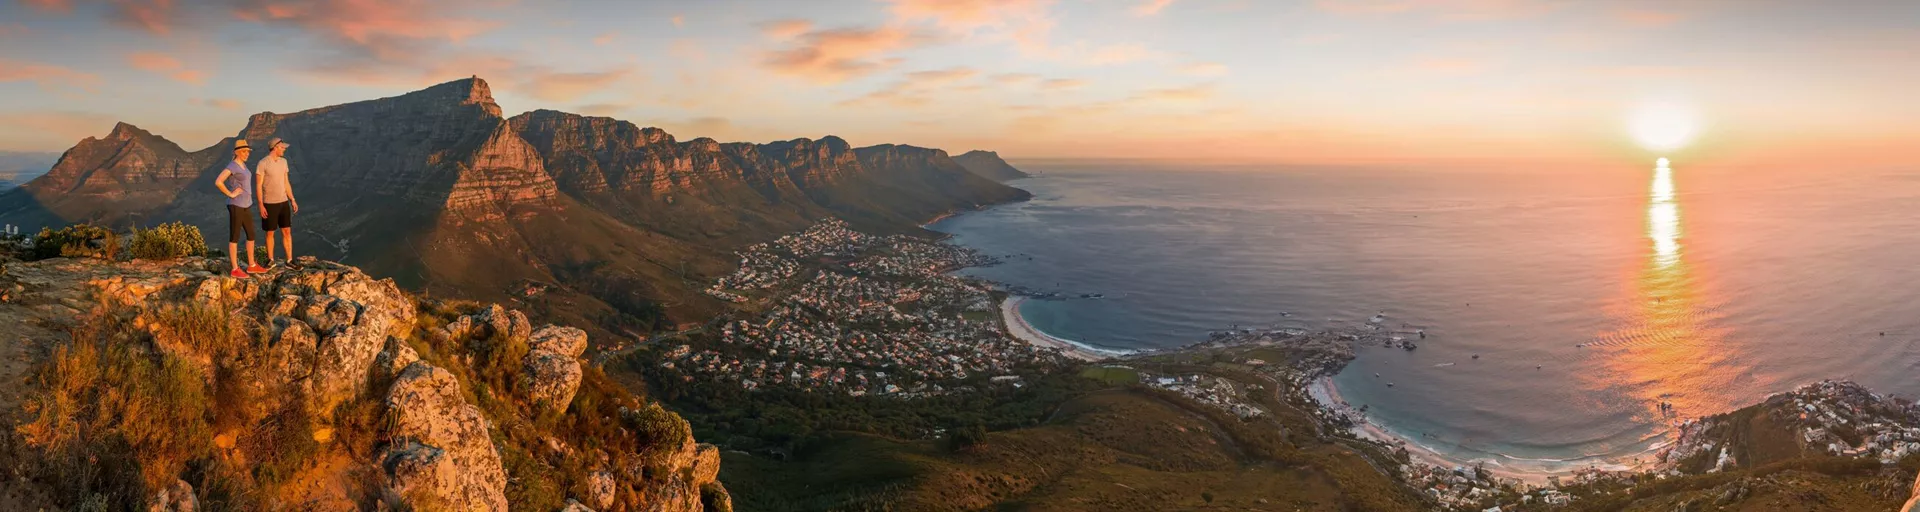 Table Top Mountain in Cape Town, South Africa at dusk